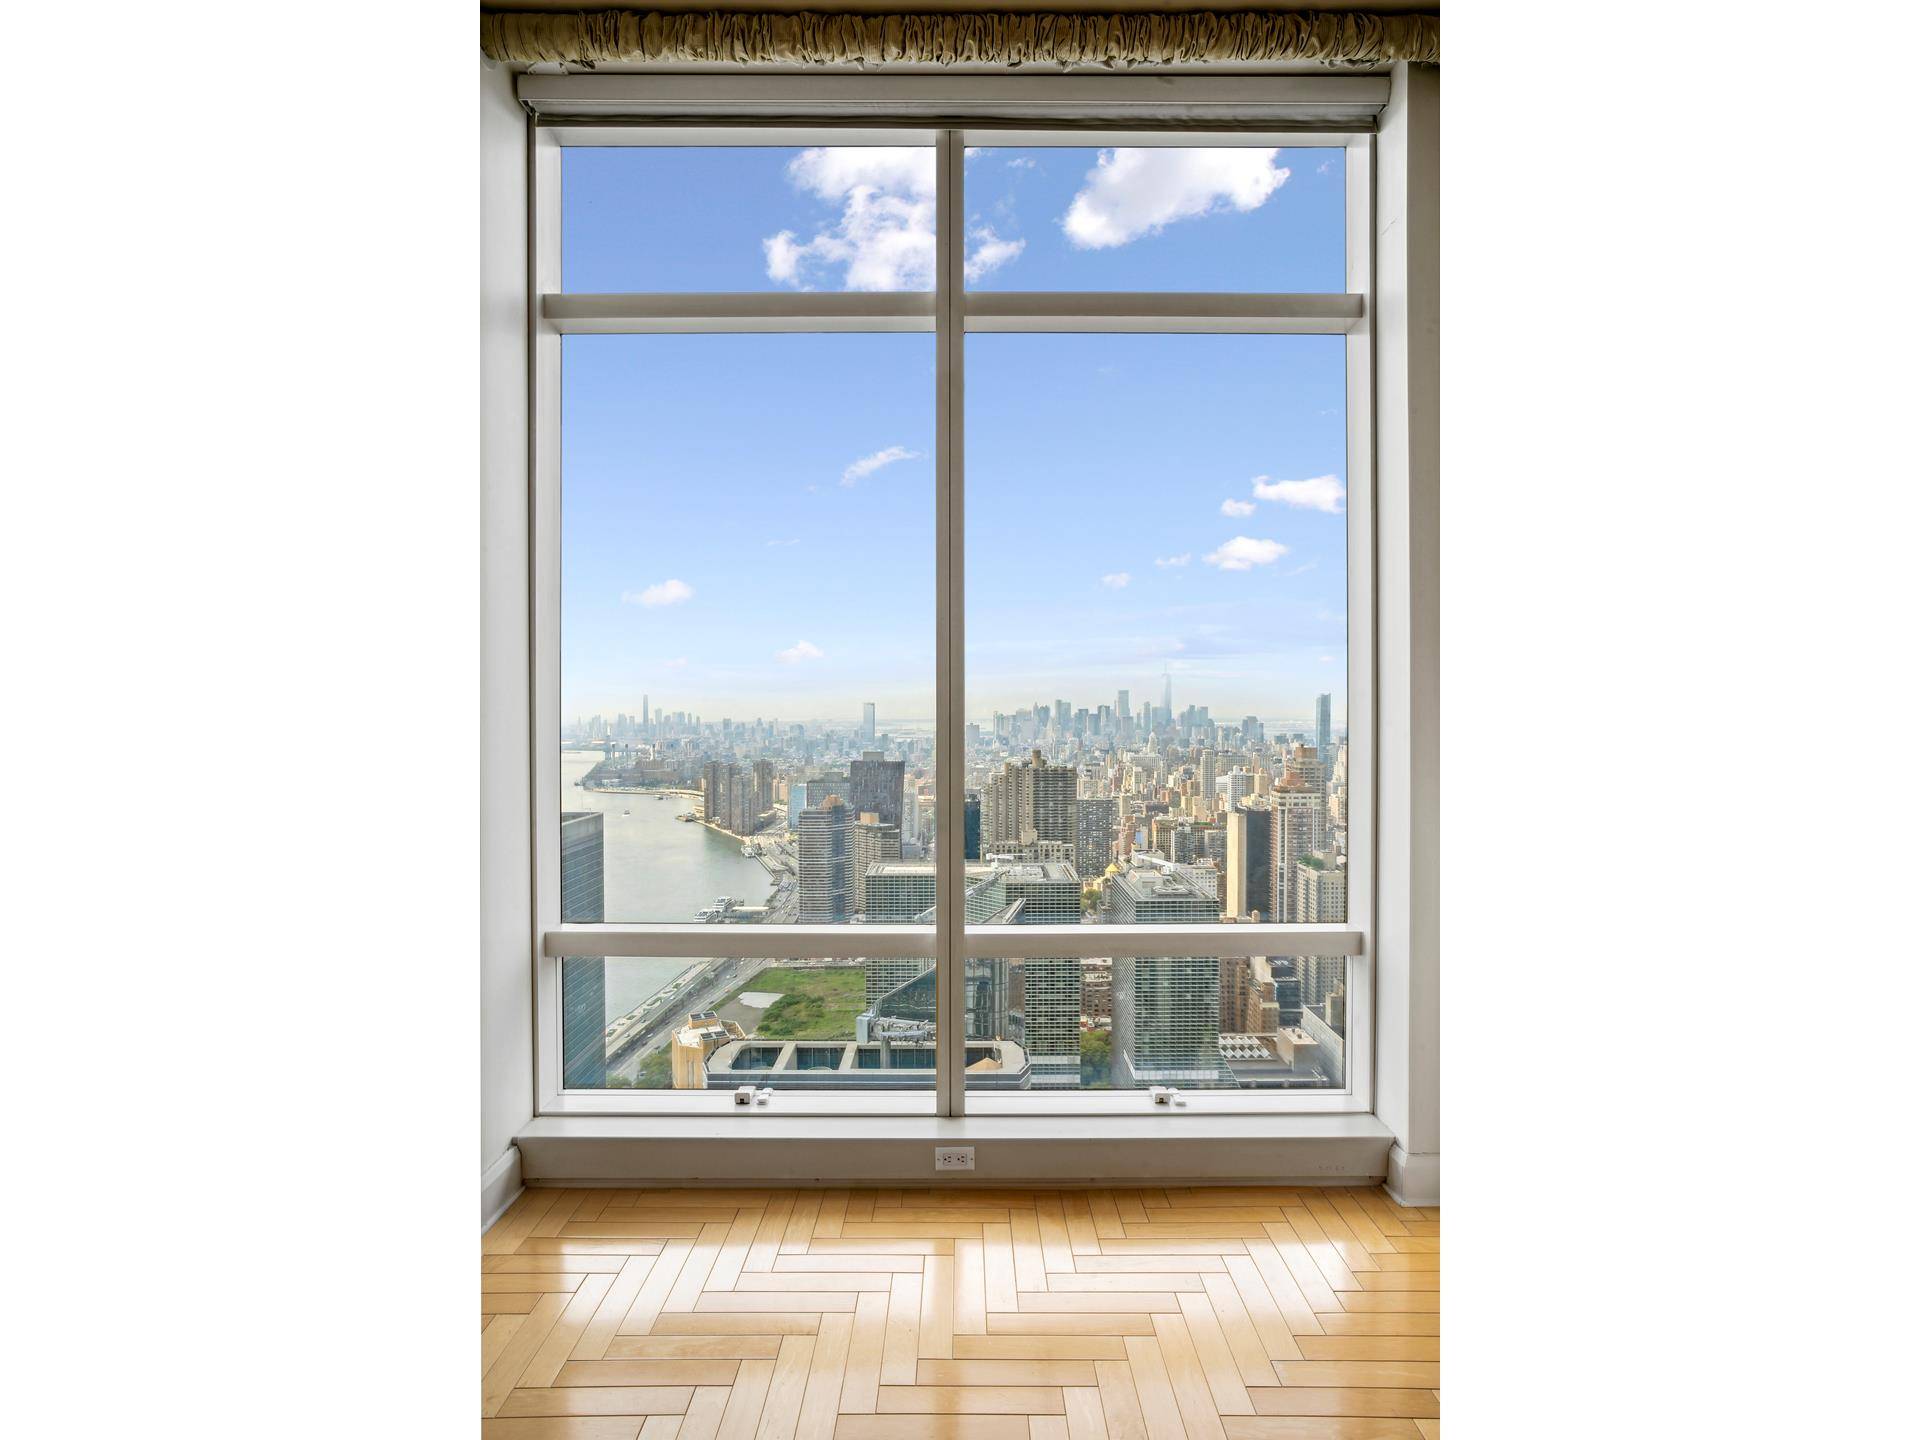 This luxurious home is located on the 76th floor and offers panoramic and unobstructed southeast and west views of Manhattan including the East River bridges, entire Midtown and Downtown.